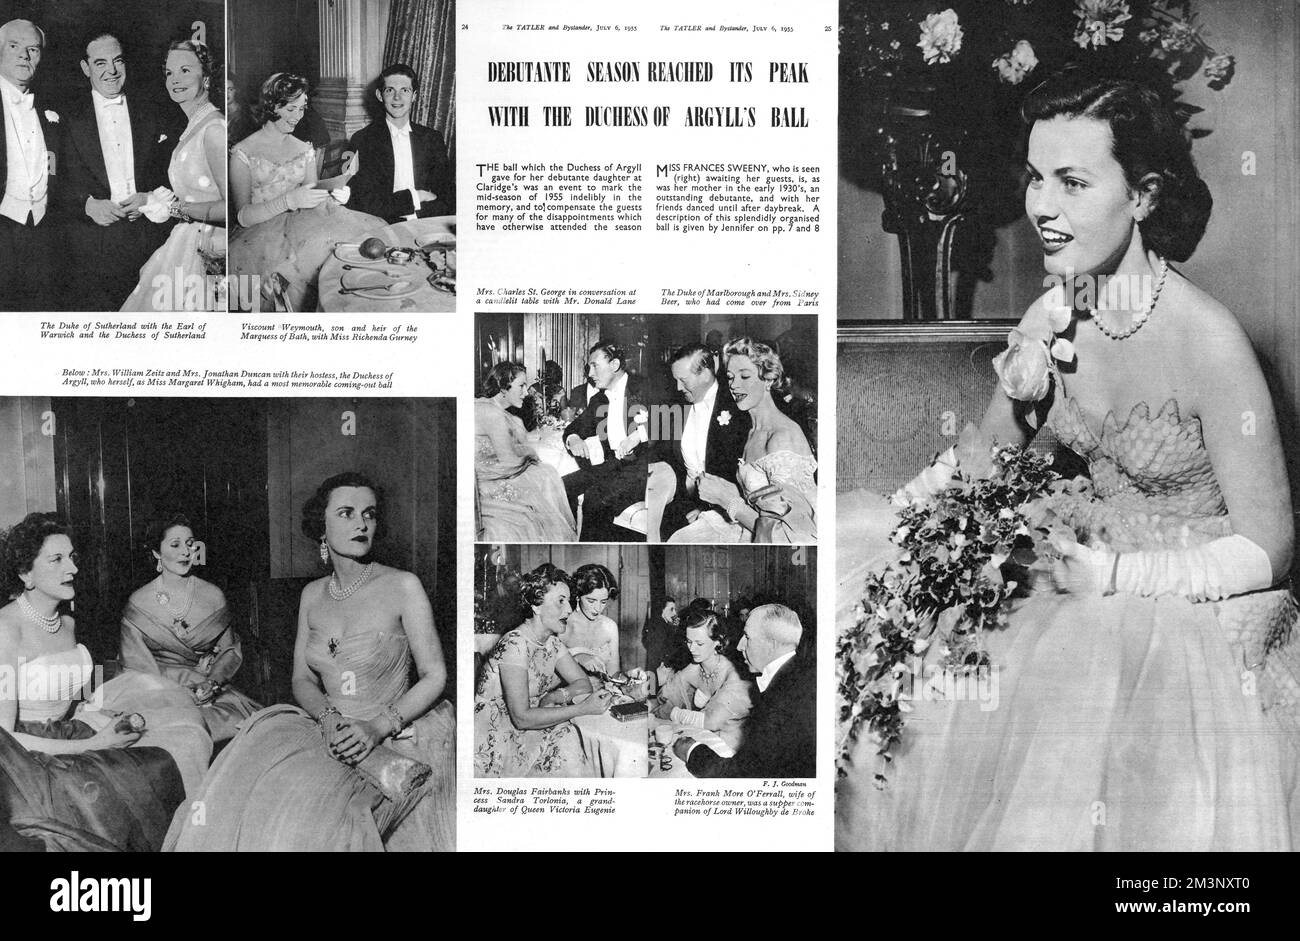 A spread from The Tatler reporting on the lavish ball held at Claridge's by the Duchess of Argyll for her daughter, Miss Frances Sweeny.  The Duchess, who was formerly Miss Margaret Whigham was Deb of the Year in 1930.  As Miss Whigham and Mrs Charles Sweeny, she was a regular face in the Tatler and other society magazines, and, according to the Tatler, Frances was 'an outstanding debutante...as was her mother...and with her friends danced until after daybreak.'  Frances can be seen on the right hand side.  In the bottom left corner is the Duchess of Argyll with Mrs William Zeitz and Mrs Jonat Stock Photo